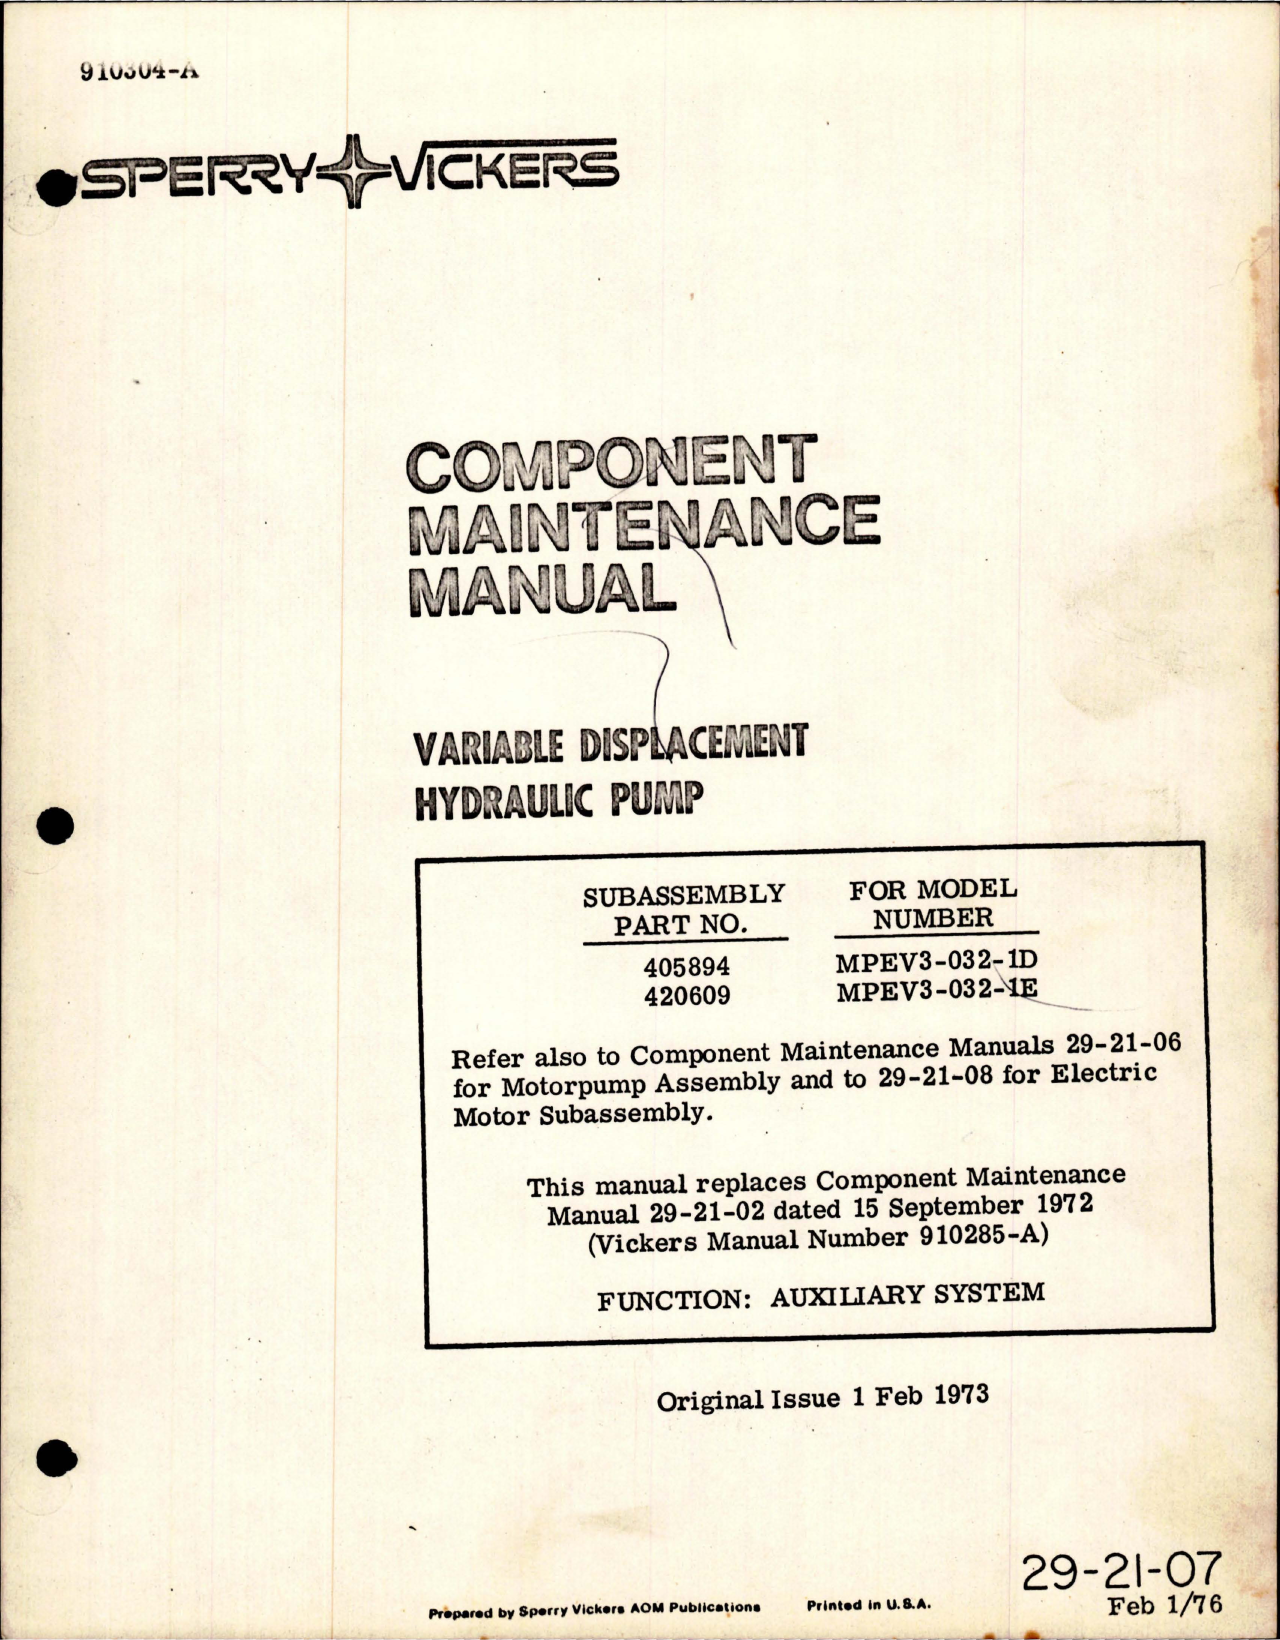 Sample page 1 from AirCorps Library document: Component Maintenance Manual for Variable Displacement Hydraulic Pump - Part 405894 and 420609